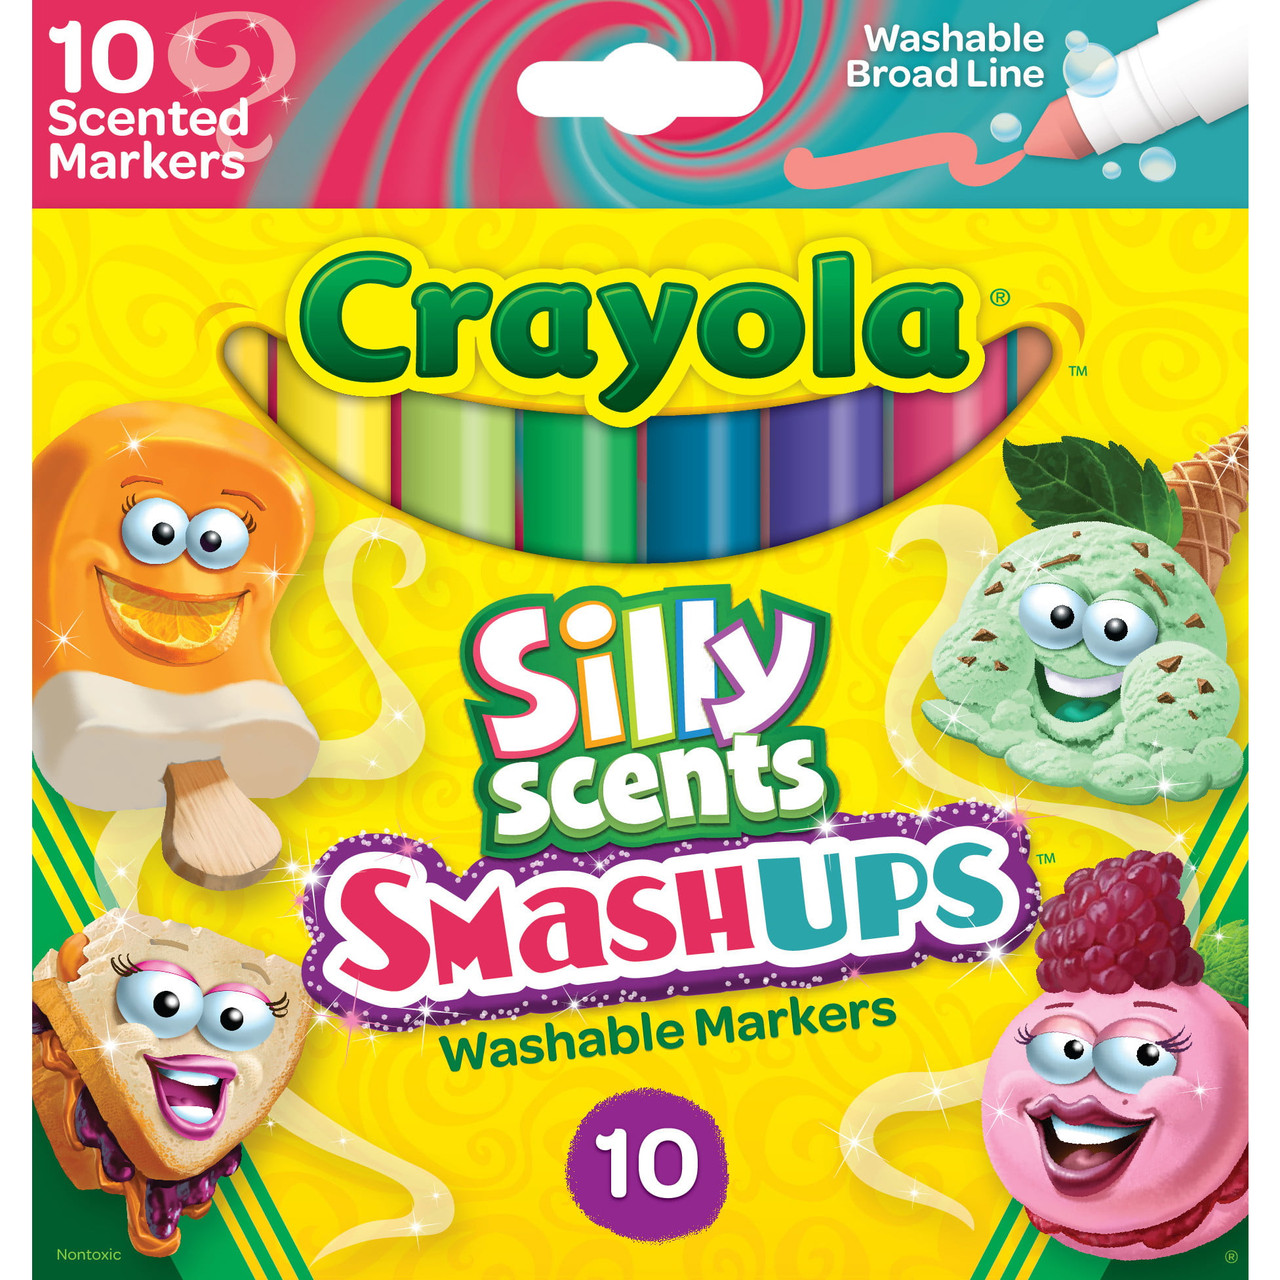 Crayola Silly Scents Sweet Washable Slim Markers 2 Packs of 10 Markers NEW